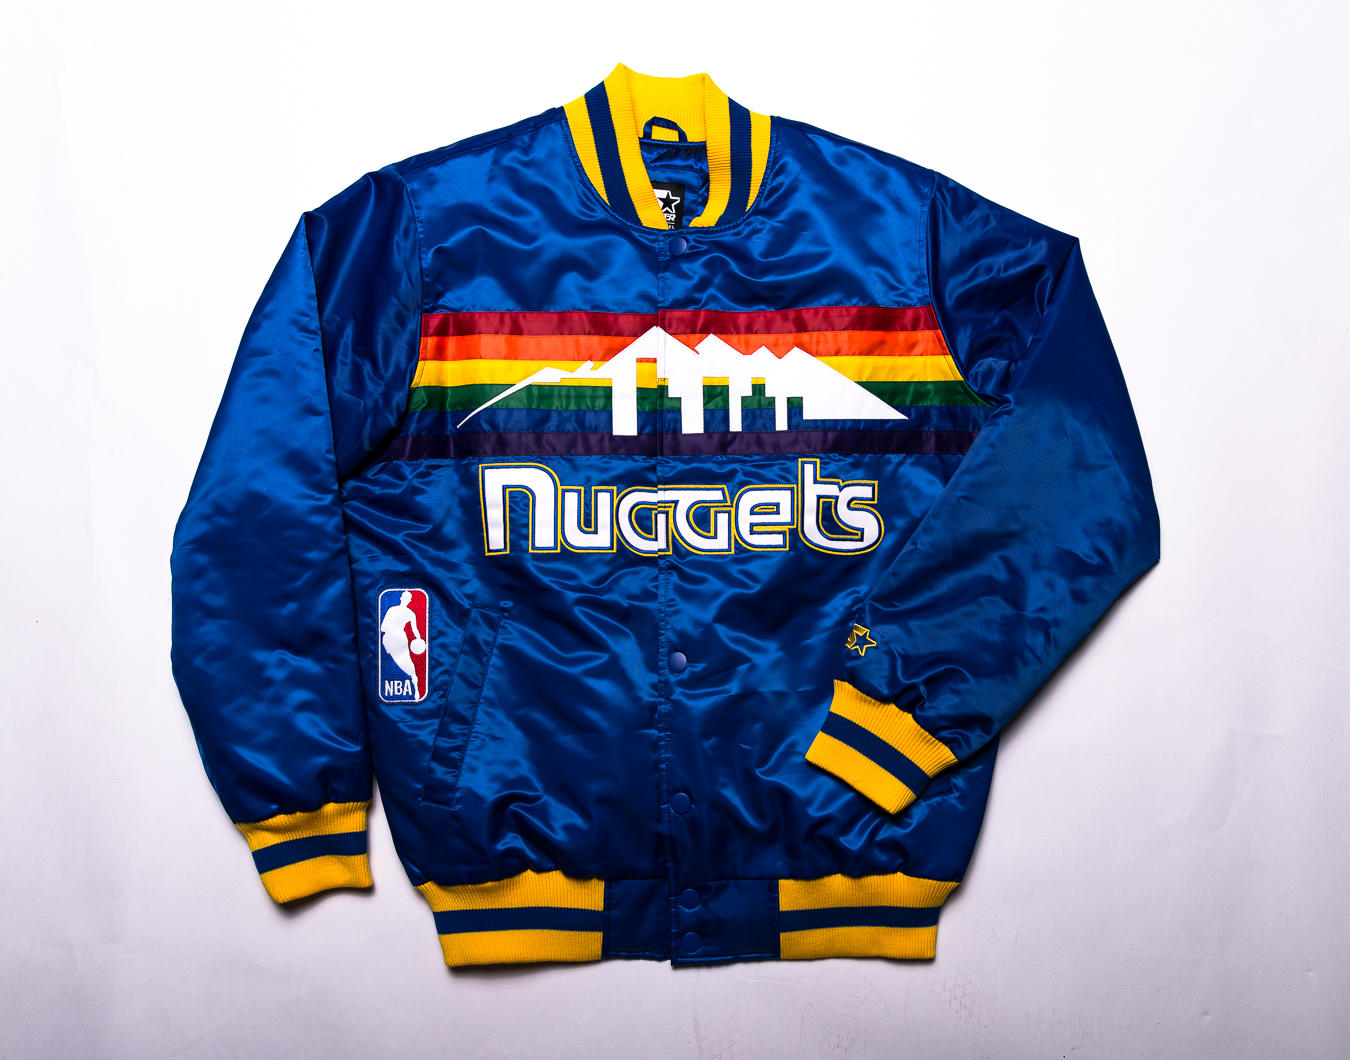 ICYMI: DTLR Teams Up With Starter On a Throwback NBA Jacket Collection | The Source